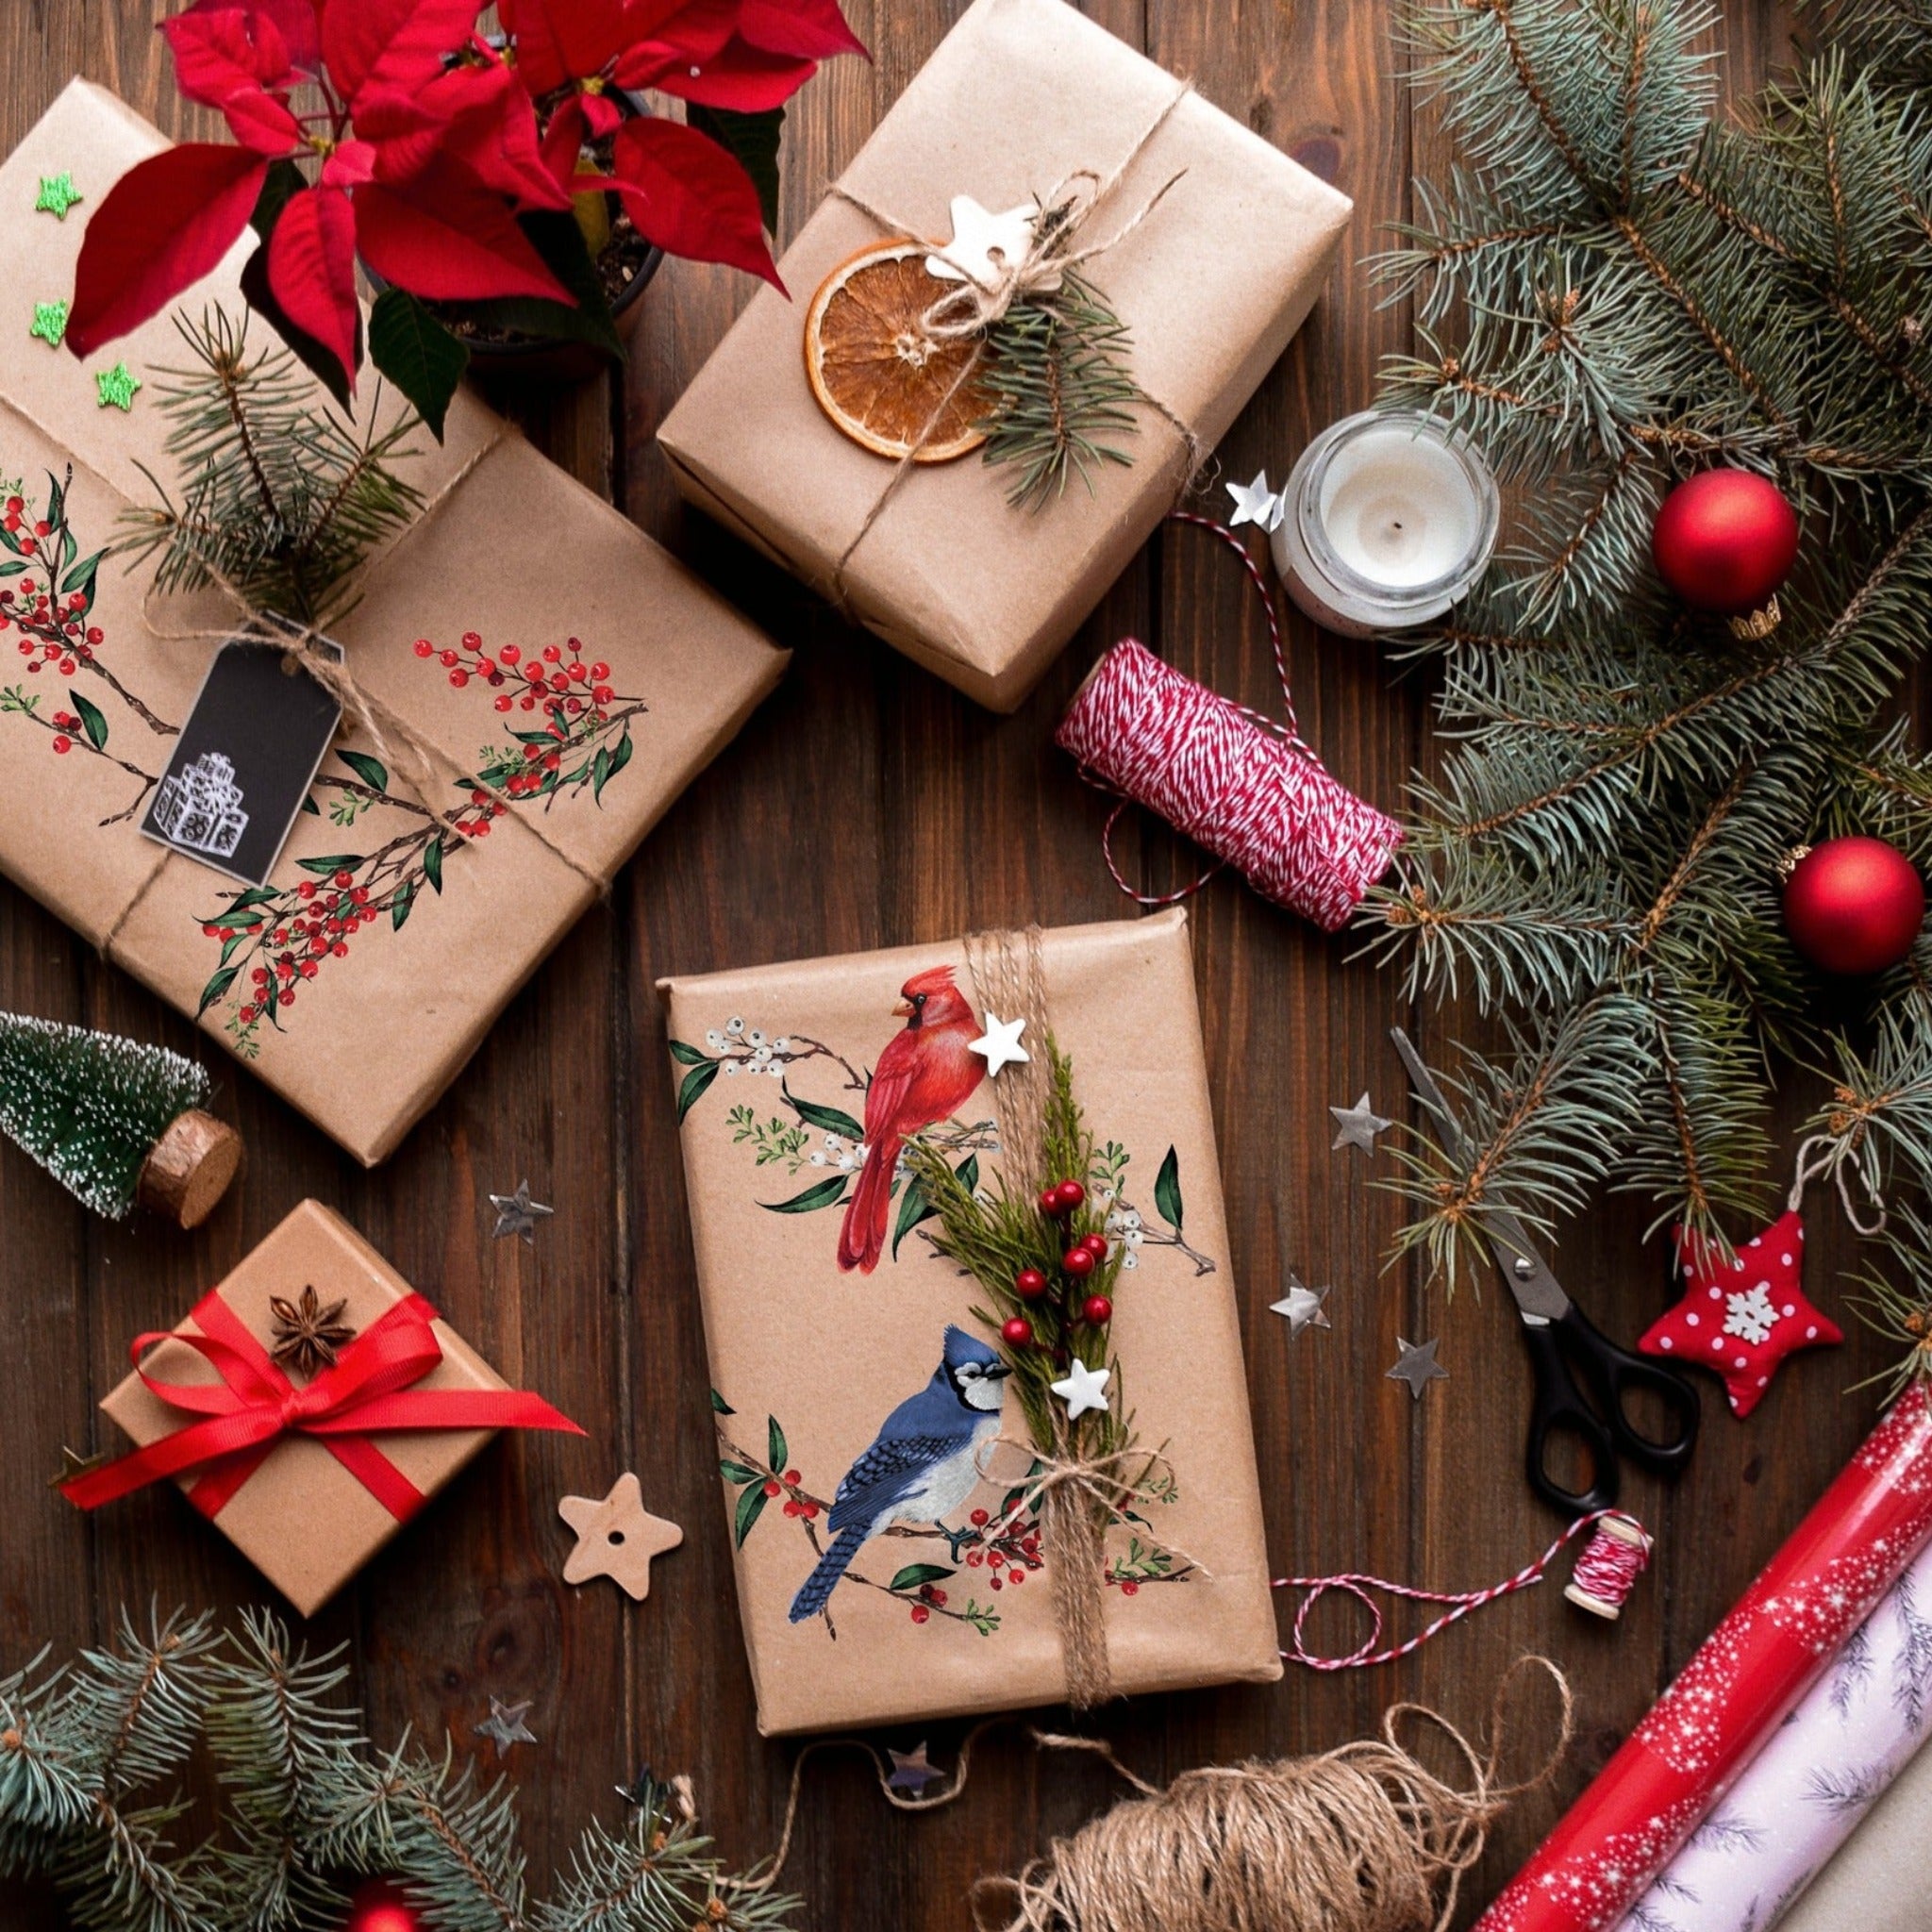 Brown paper wrapped gifts feature ReDeisign with Prima's Winterberry small transfer on them.